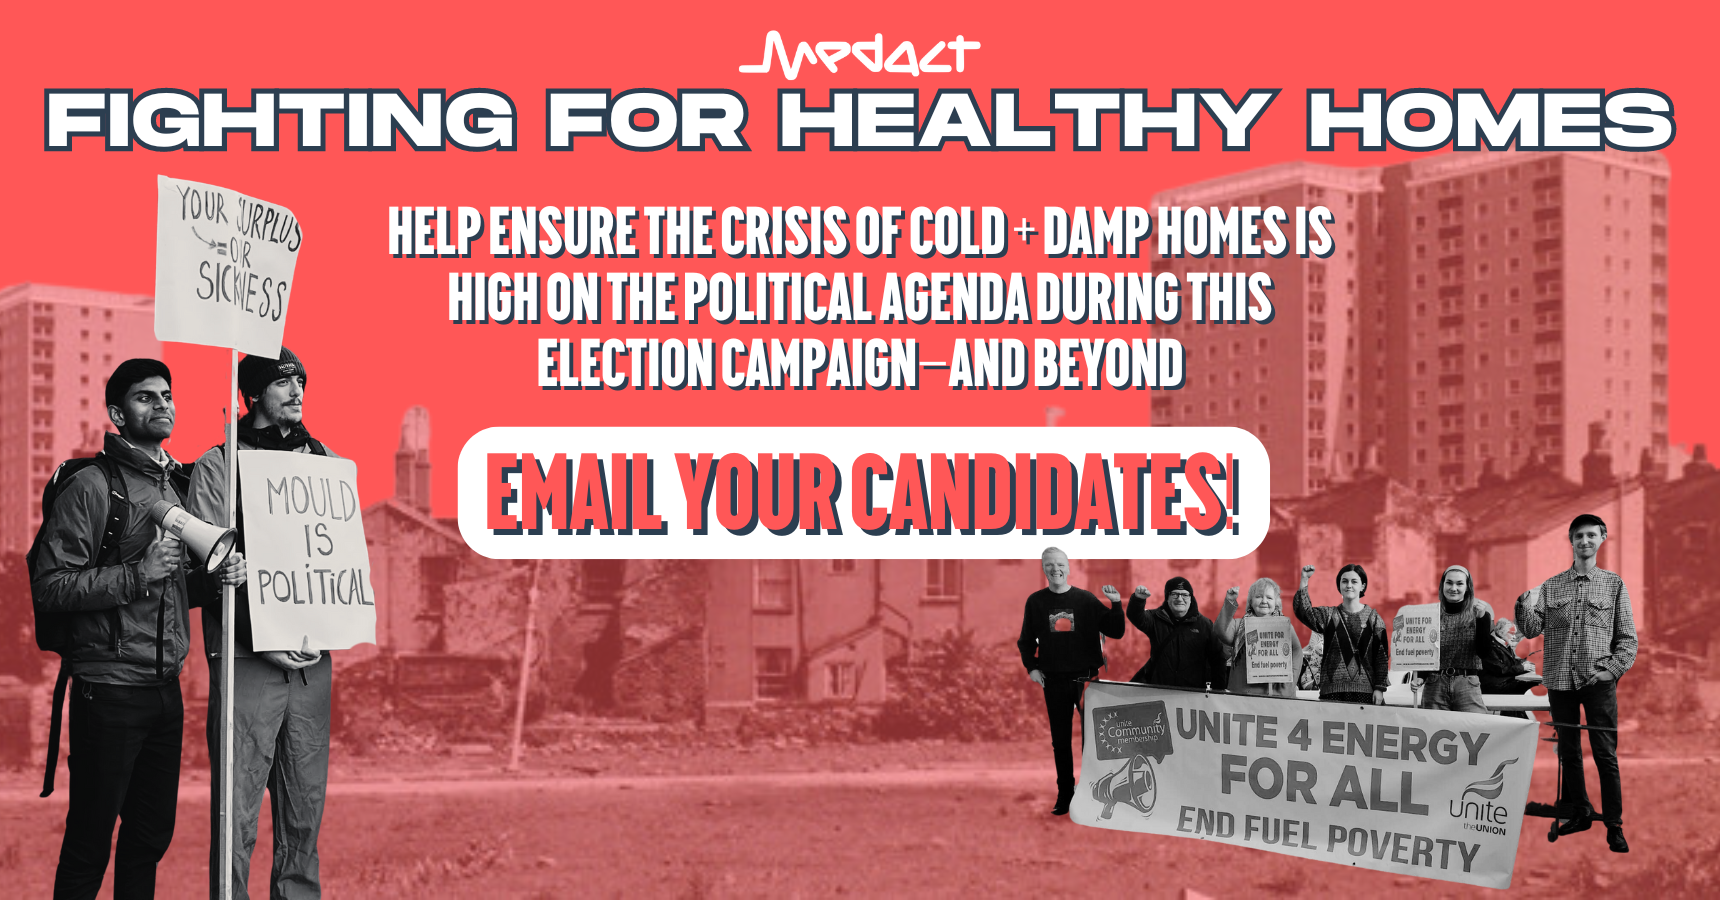 Medact - Fighting for Healthy Homes: Help ensure the crisis of cold & damp homes is high on the political agenda during this election campaign—and beyond. Email your candidates!